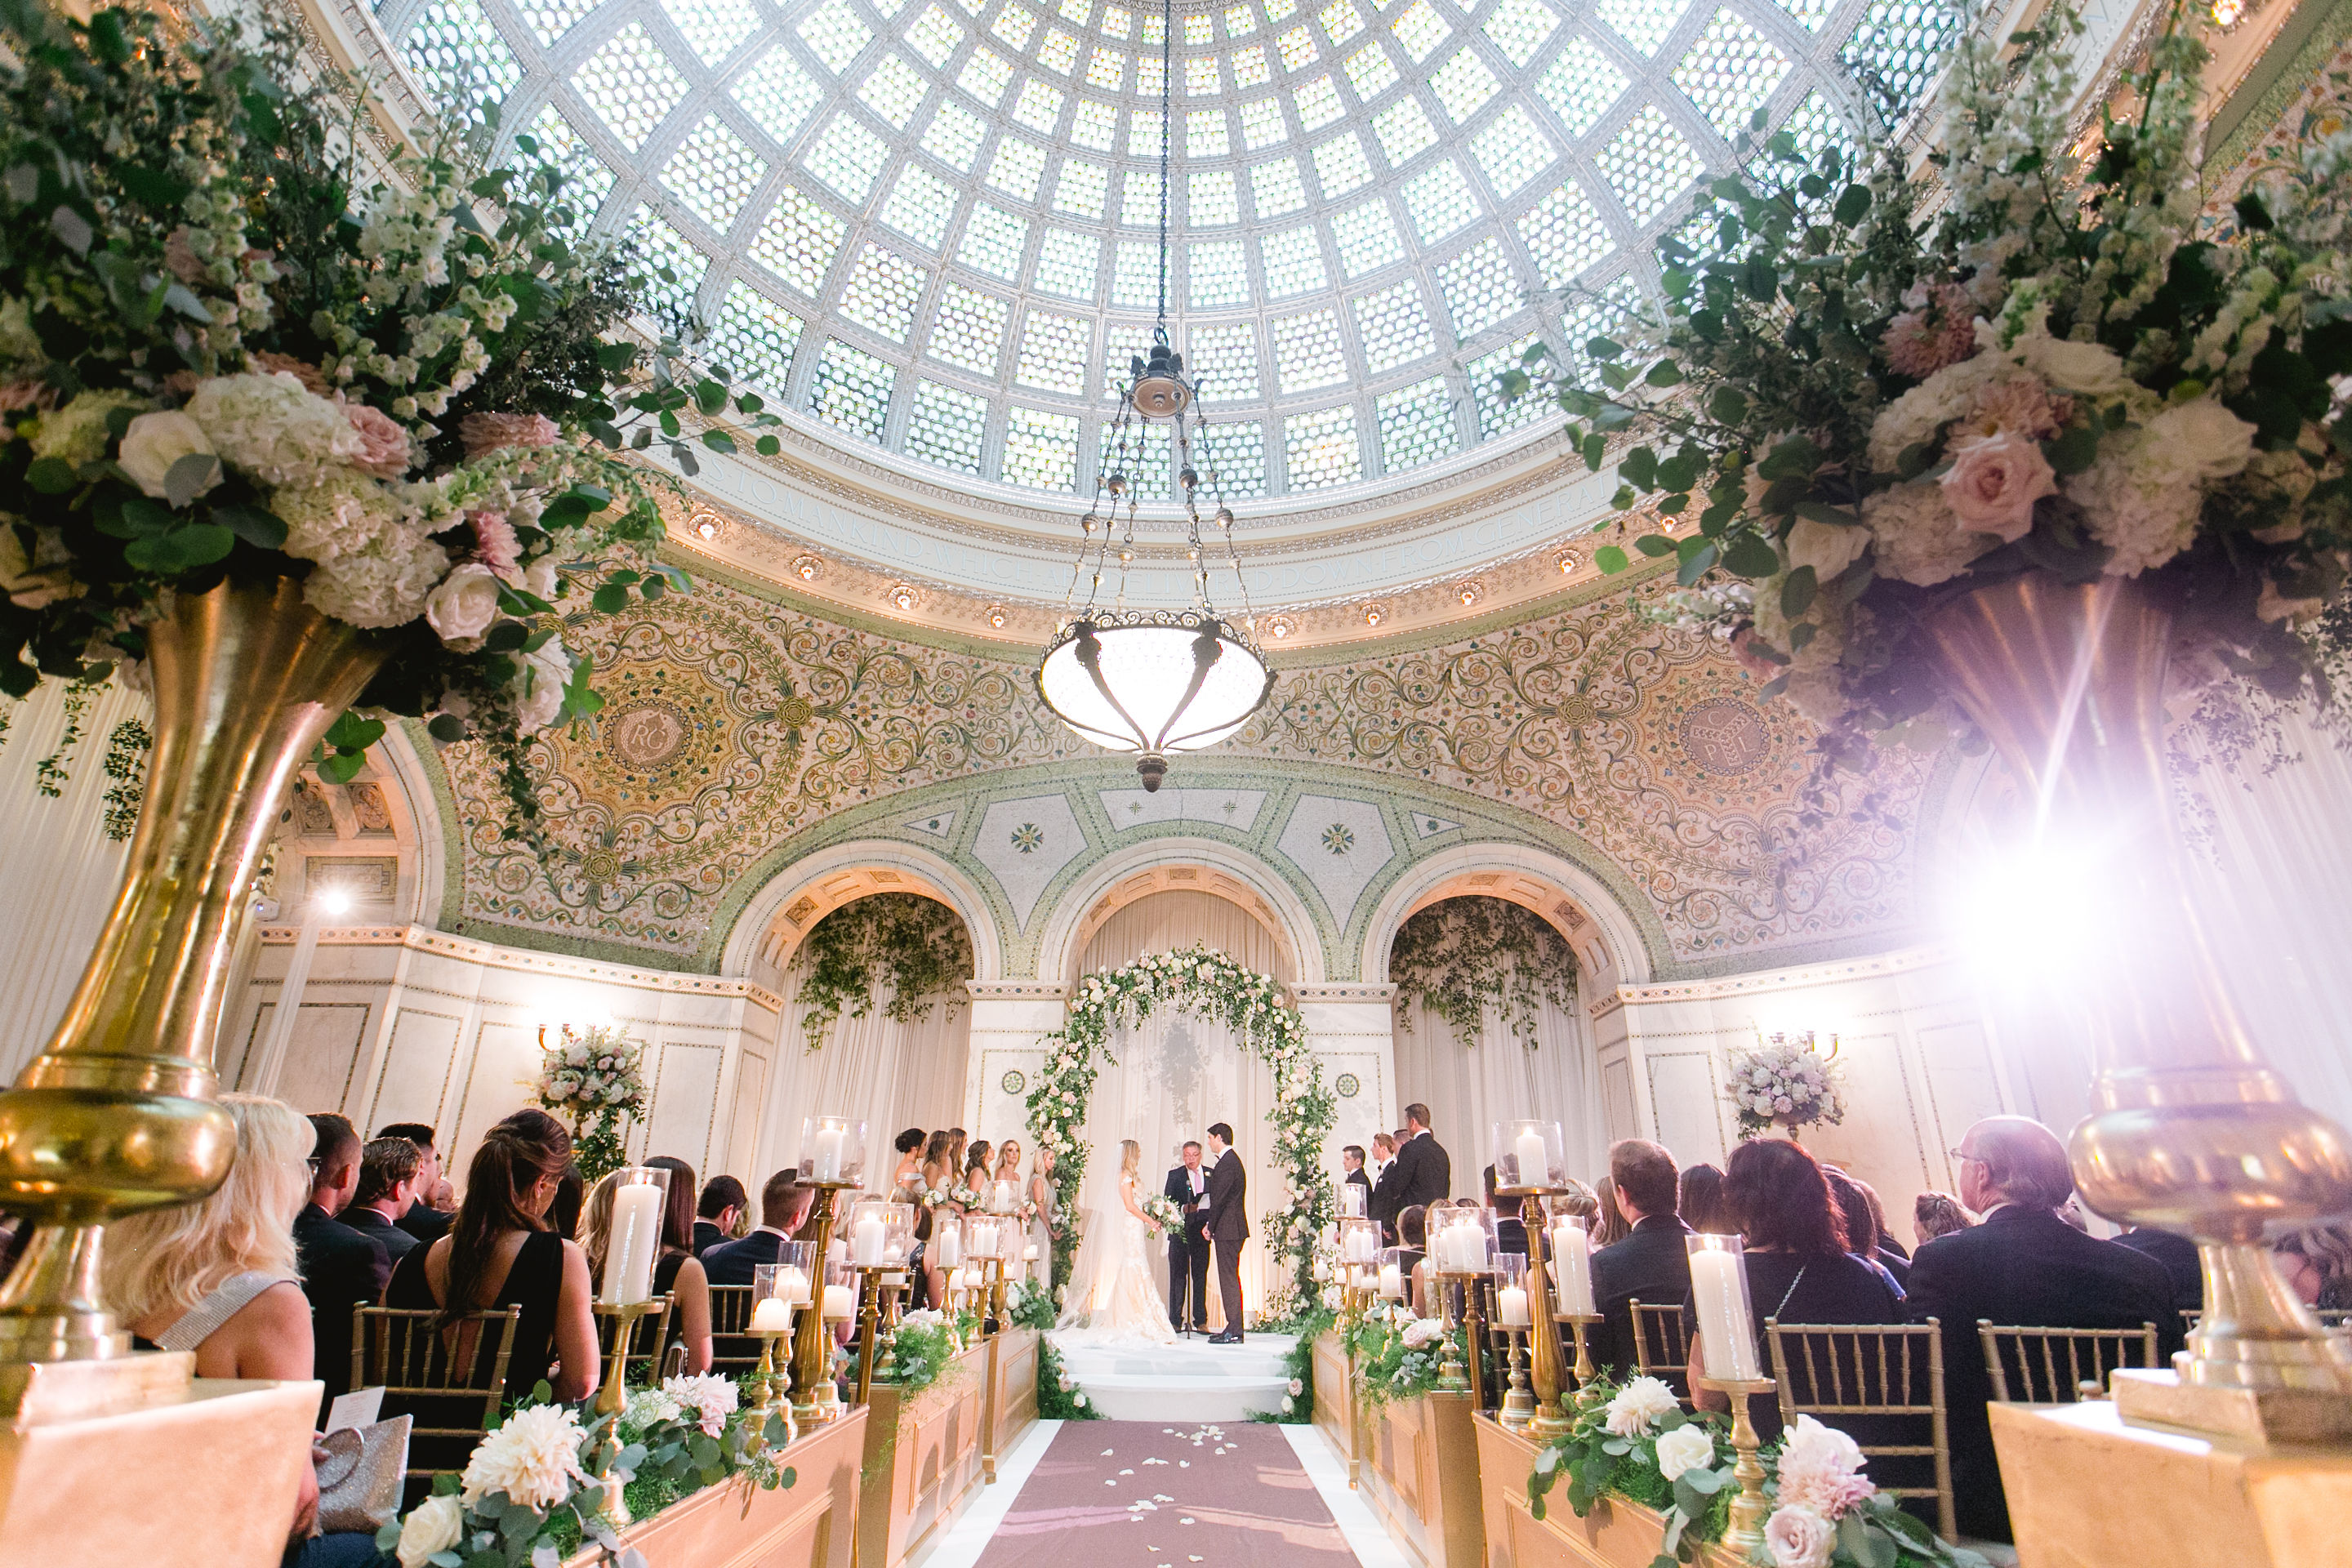 Cassie & Colby - Chicago Cultural Center - Wedicity Wedding - Clary Pfeiffer Photography